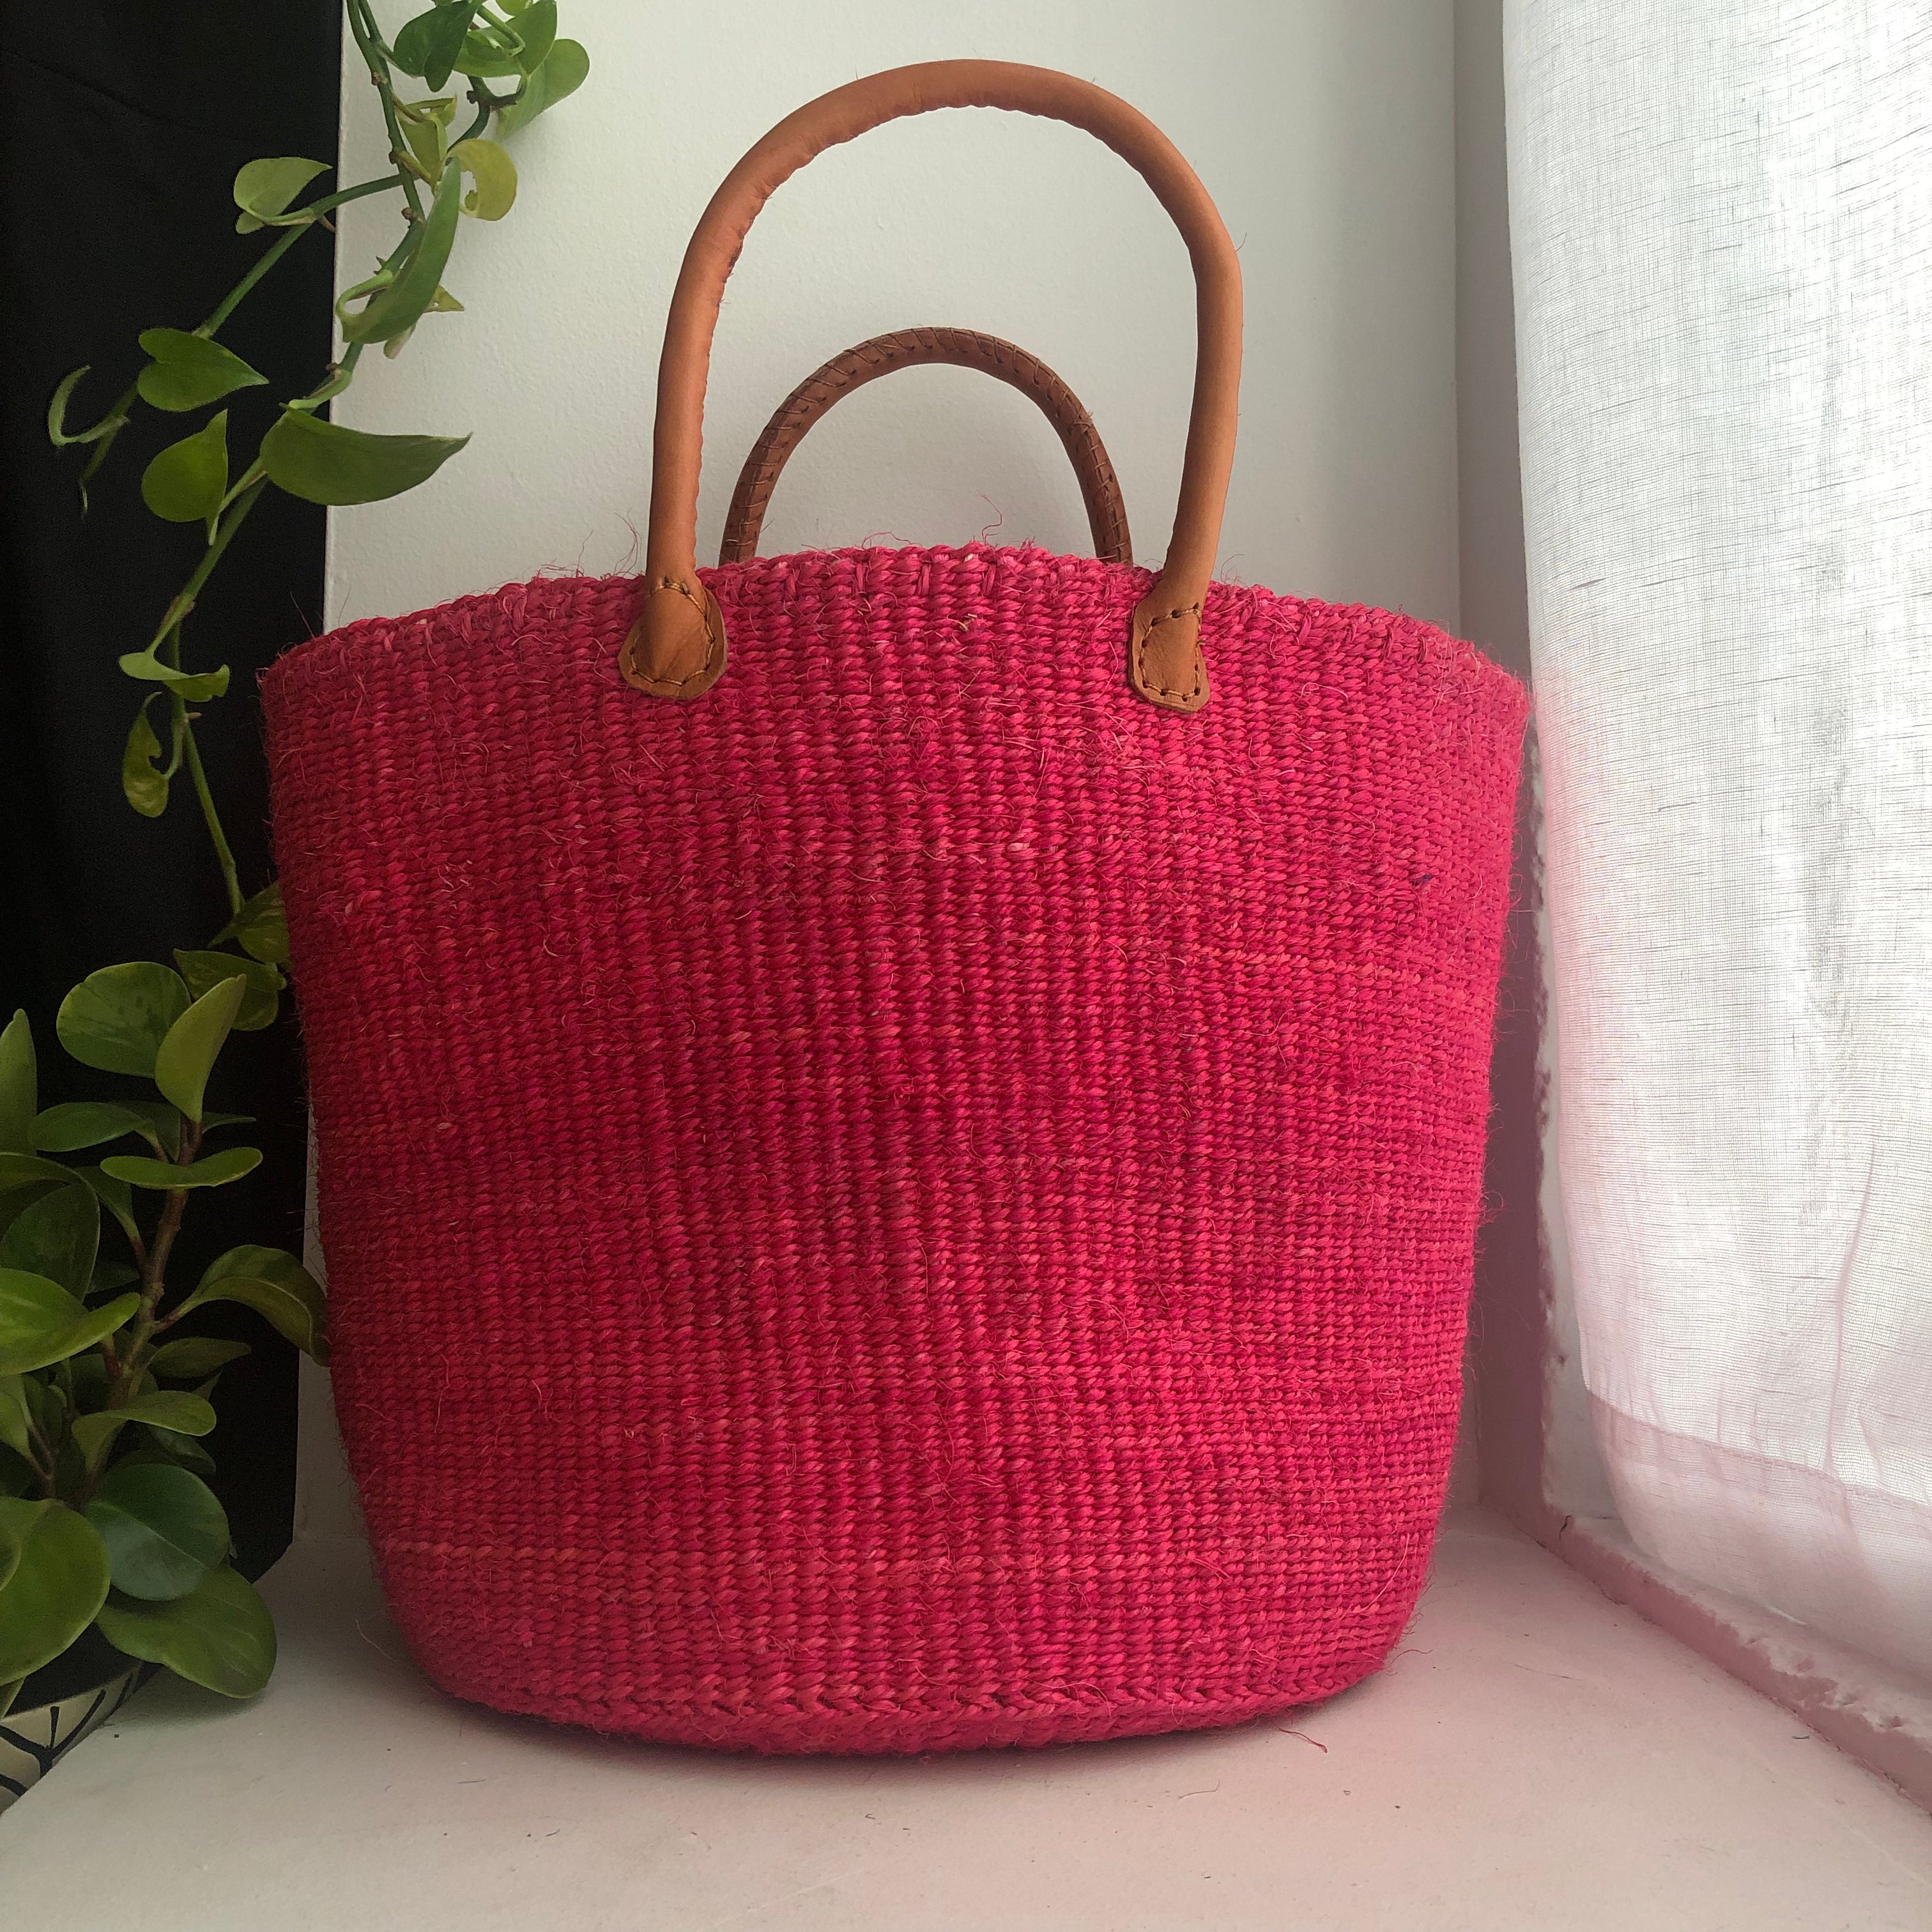 hot pink basket with leather handles